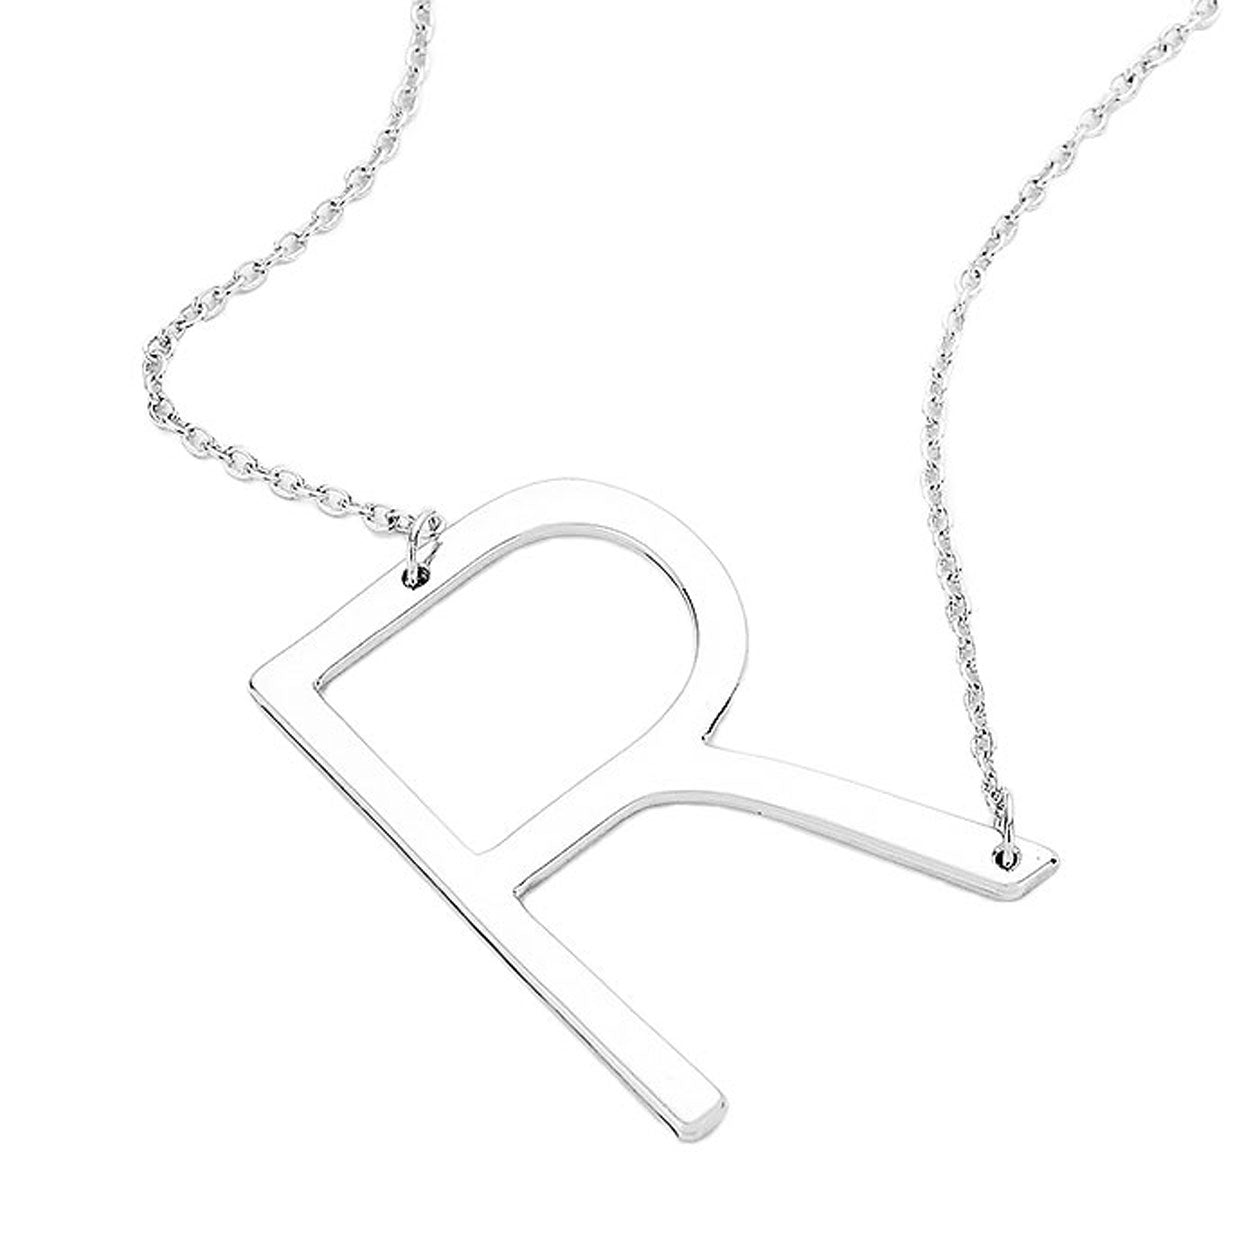 Silver R Monogram Metal Pendant Necklace. Beautifully crafted design adds a gorgeous glow to any outfit. Jewelry that fits your lifestyle! Perfect Birthday Gift, Anniversary Gift, Mother's Day Gift, Anniversary Gift, Graduation Gift, Prom Jewelry, Just Because Gift, Thank you Gift.